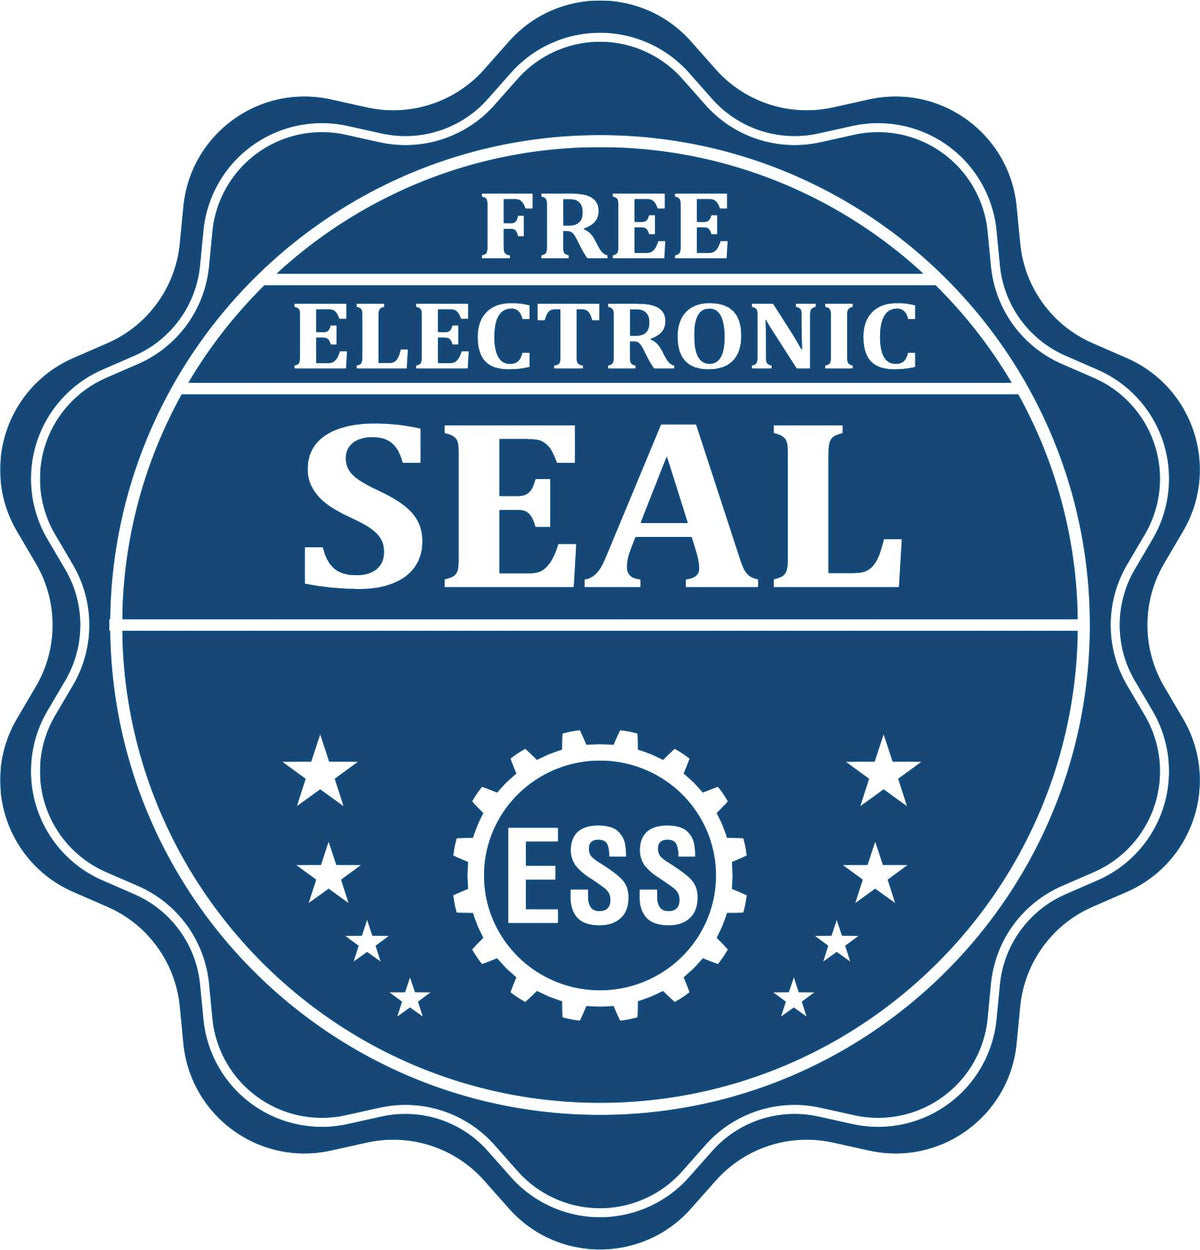 A badge showing a free electronic seal for the Heavy-Duty Michigan Rectangular Notary Stamp with stars and the ESS gear on the emblem.